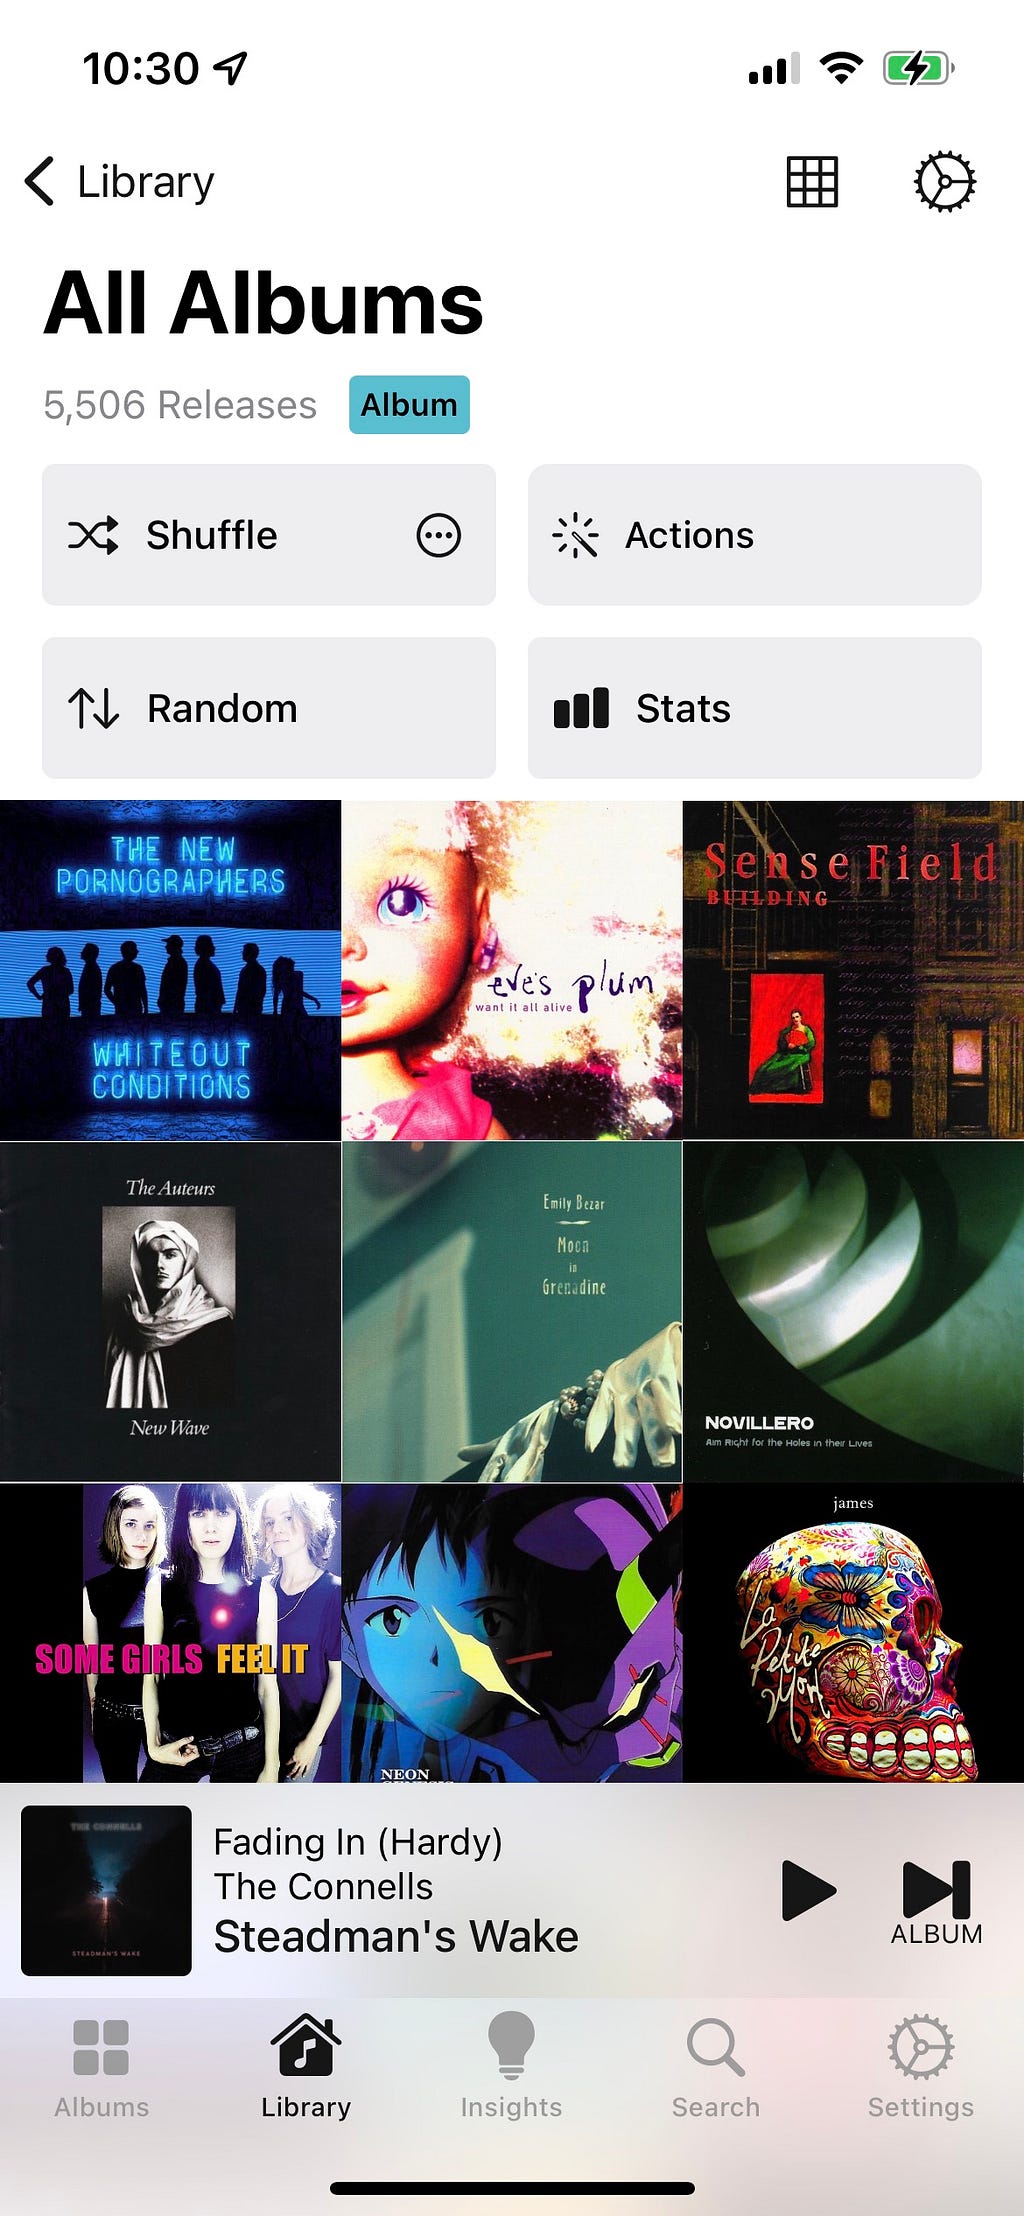 Library/All Albums in random order, in the Albums iPhone app.